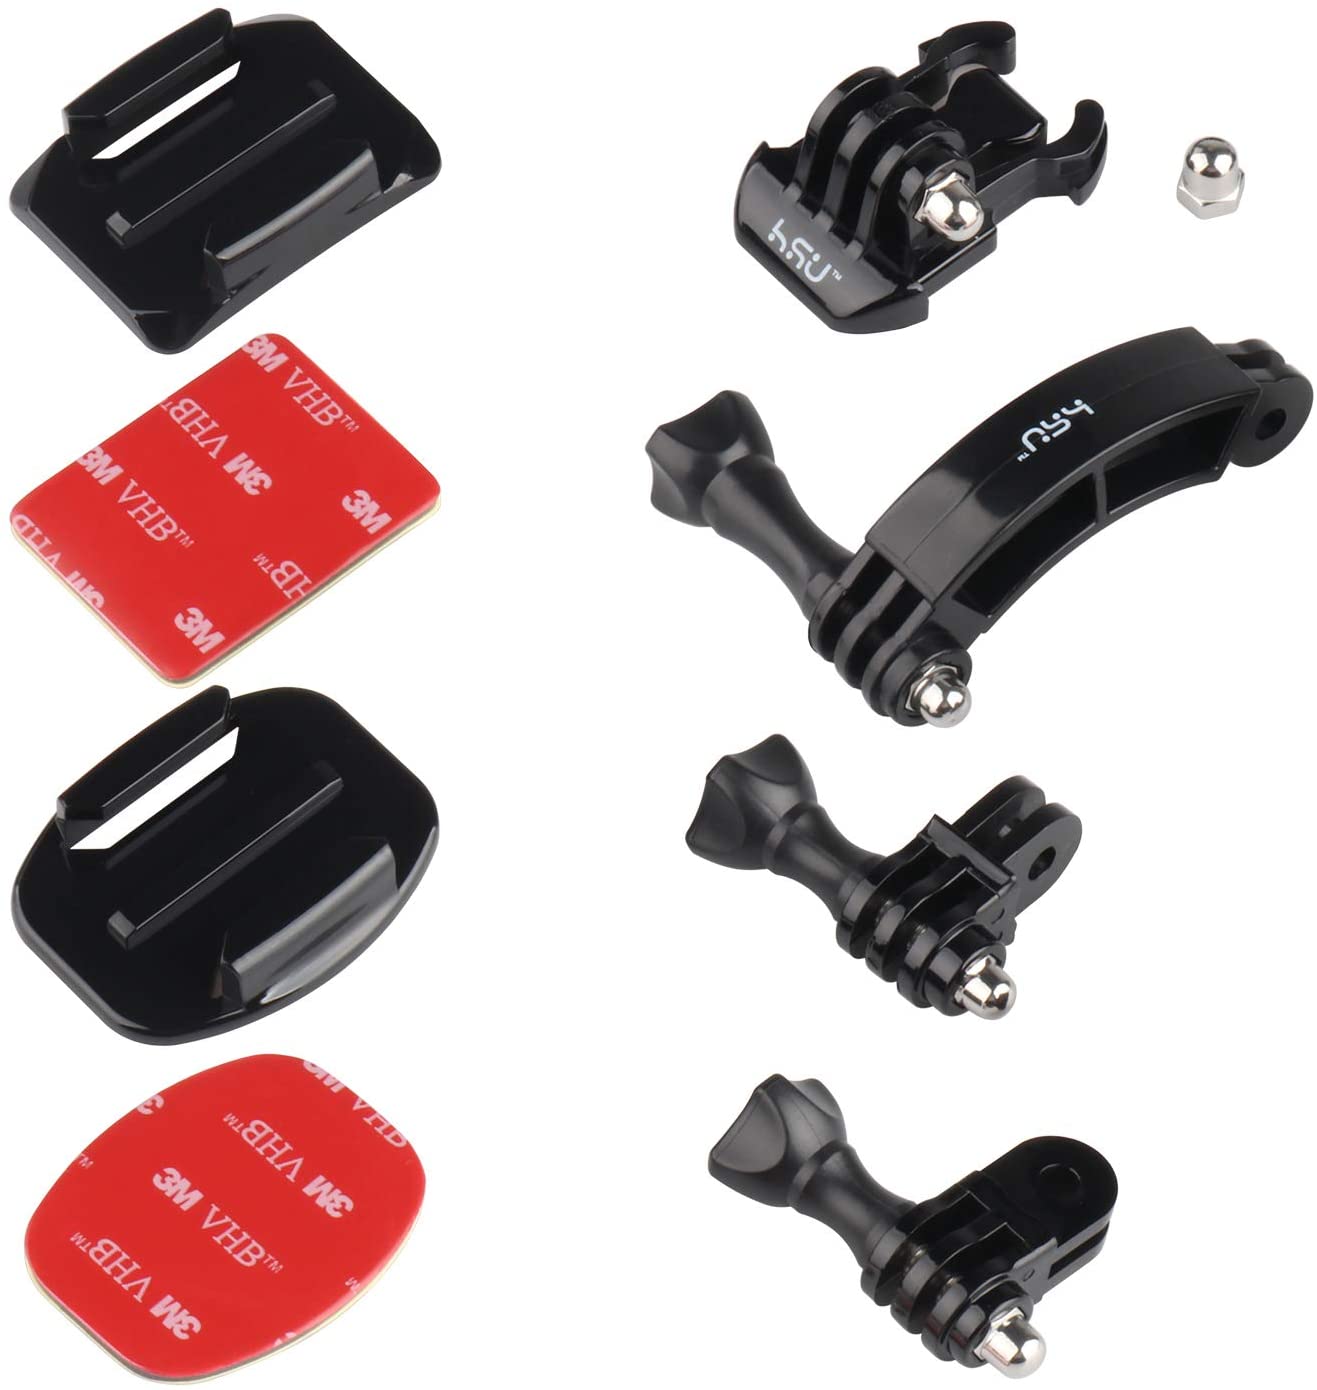 HSU Universal Rotary Extension Mount Set for GoPro Hero 9 8 (2018) 7 6 5, Go pro Extension Arm with Quick Release Buckle Clip Basic Base Mount and Thumb Screw